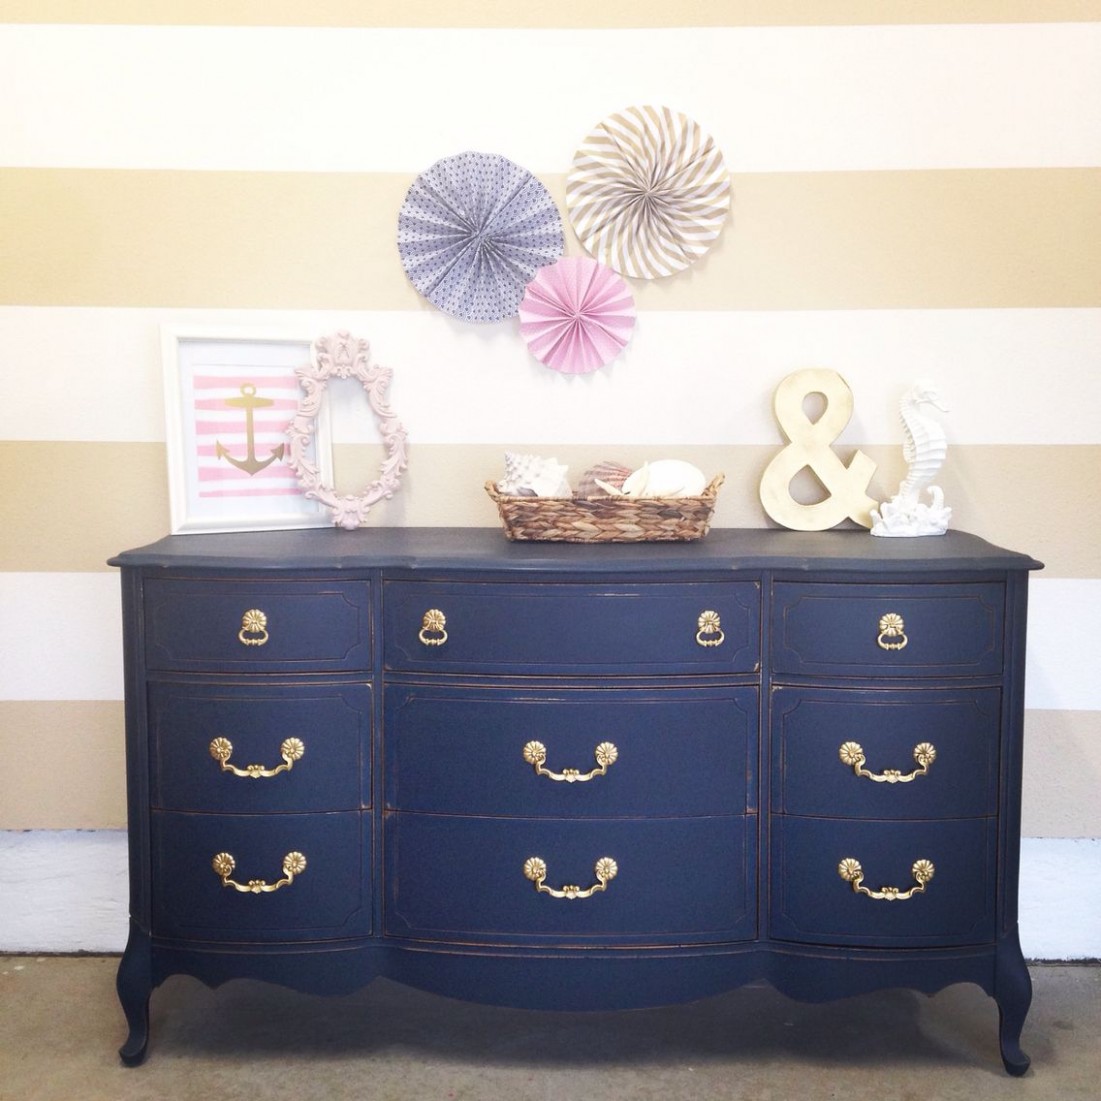 Custom Mix Of Annie Sloan Chalkpaint To Get This Navy Blue ..